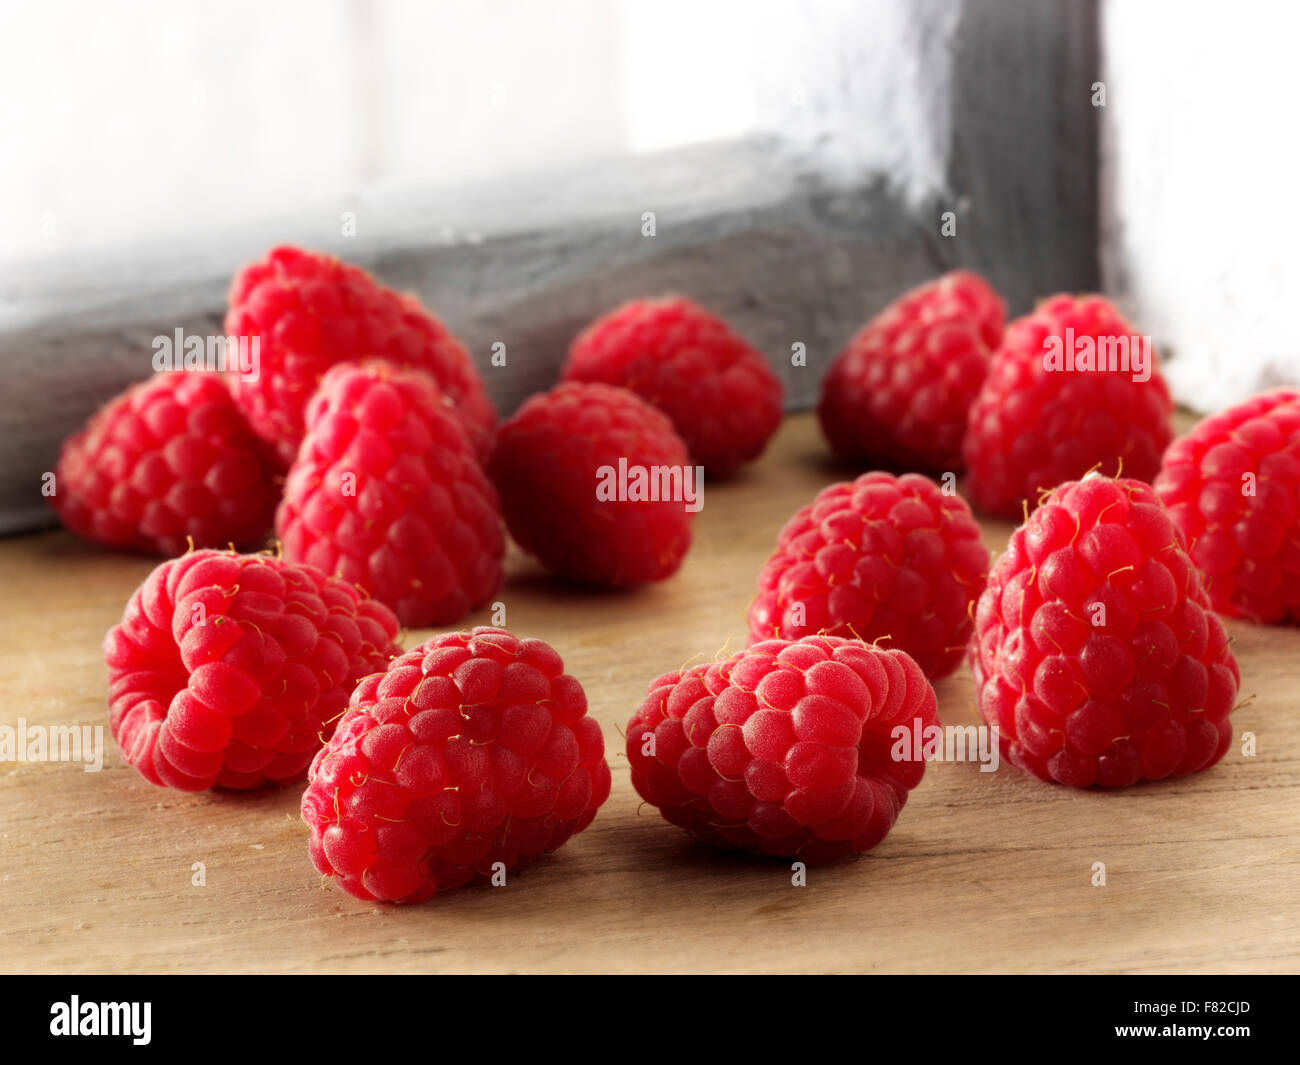 Close up of fresh whole red raspberry fruits in a kitchen setting Stock Photo